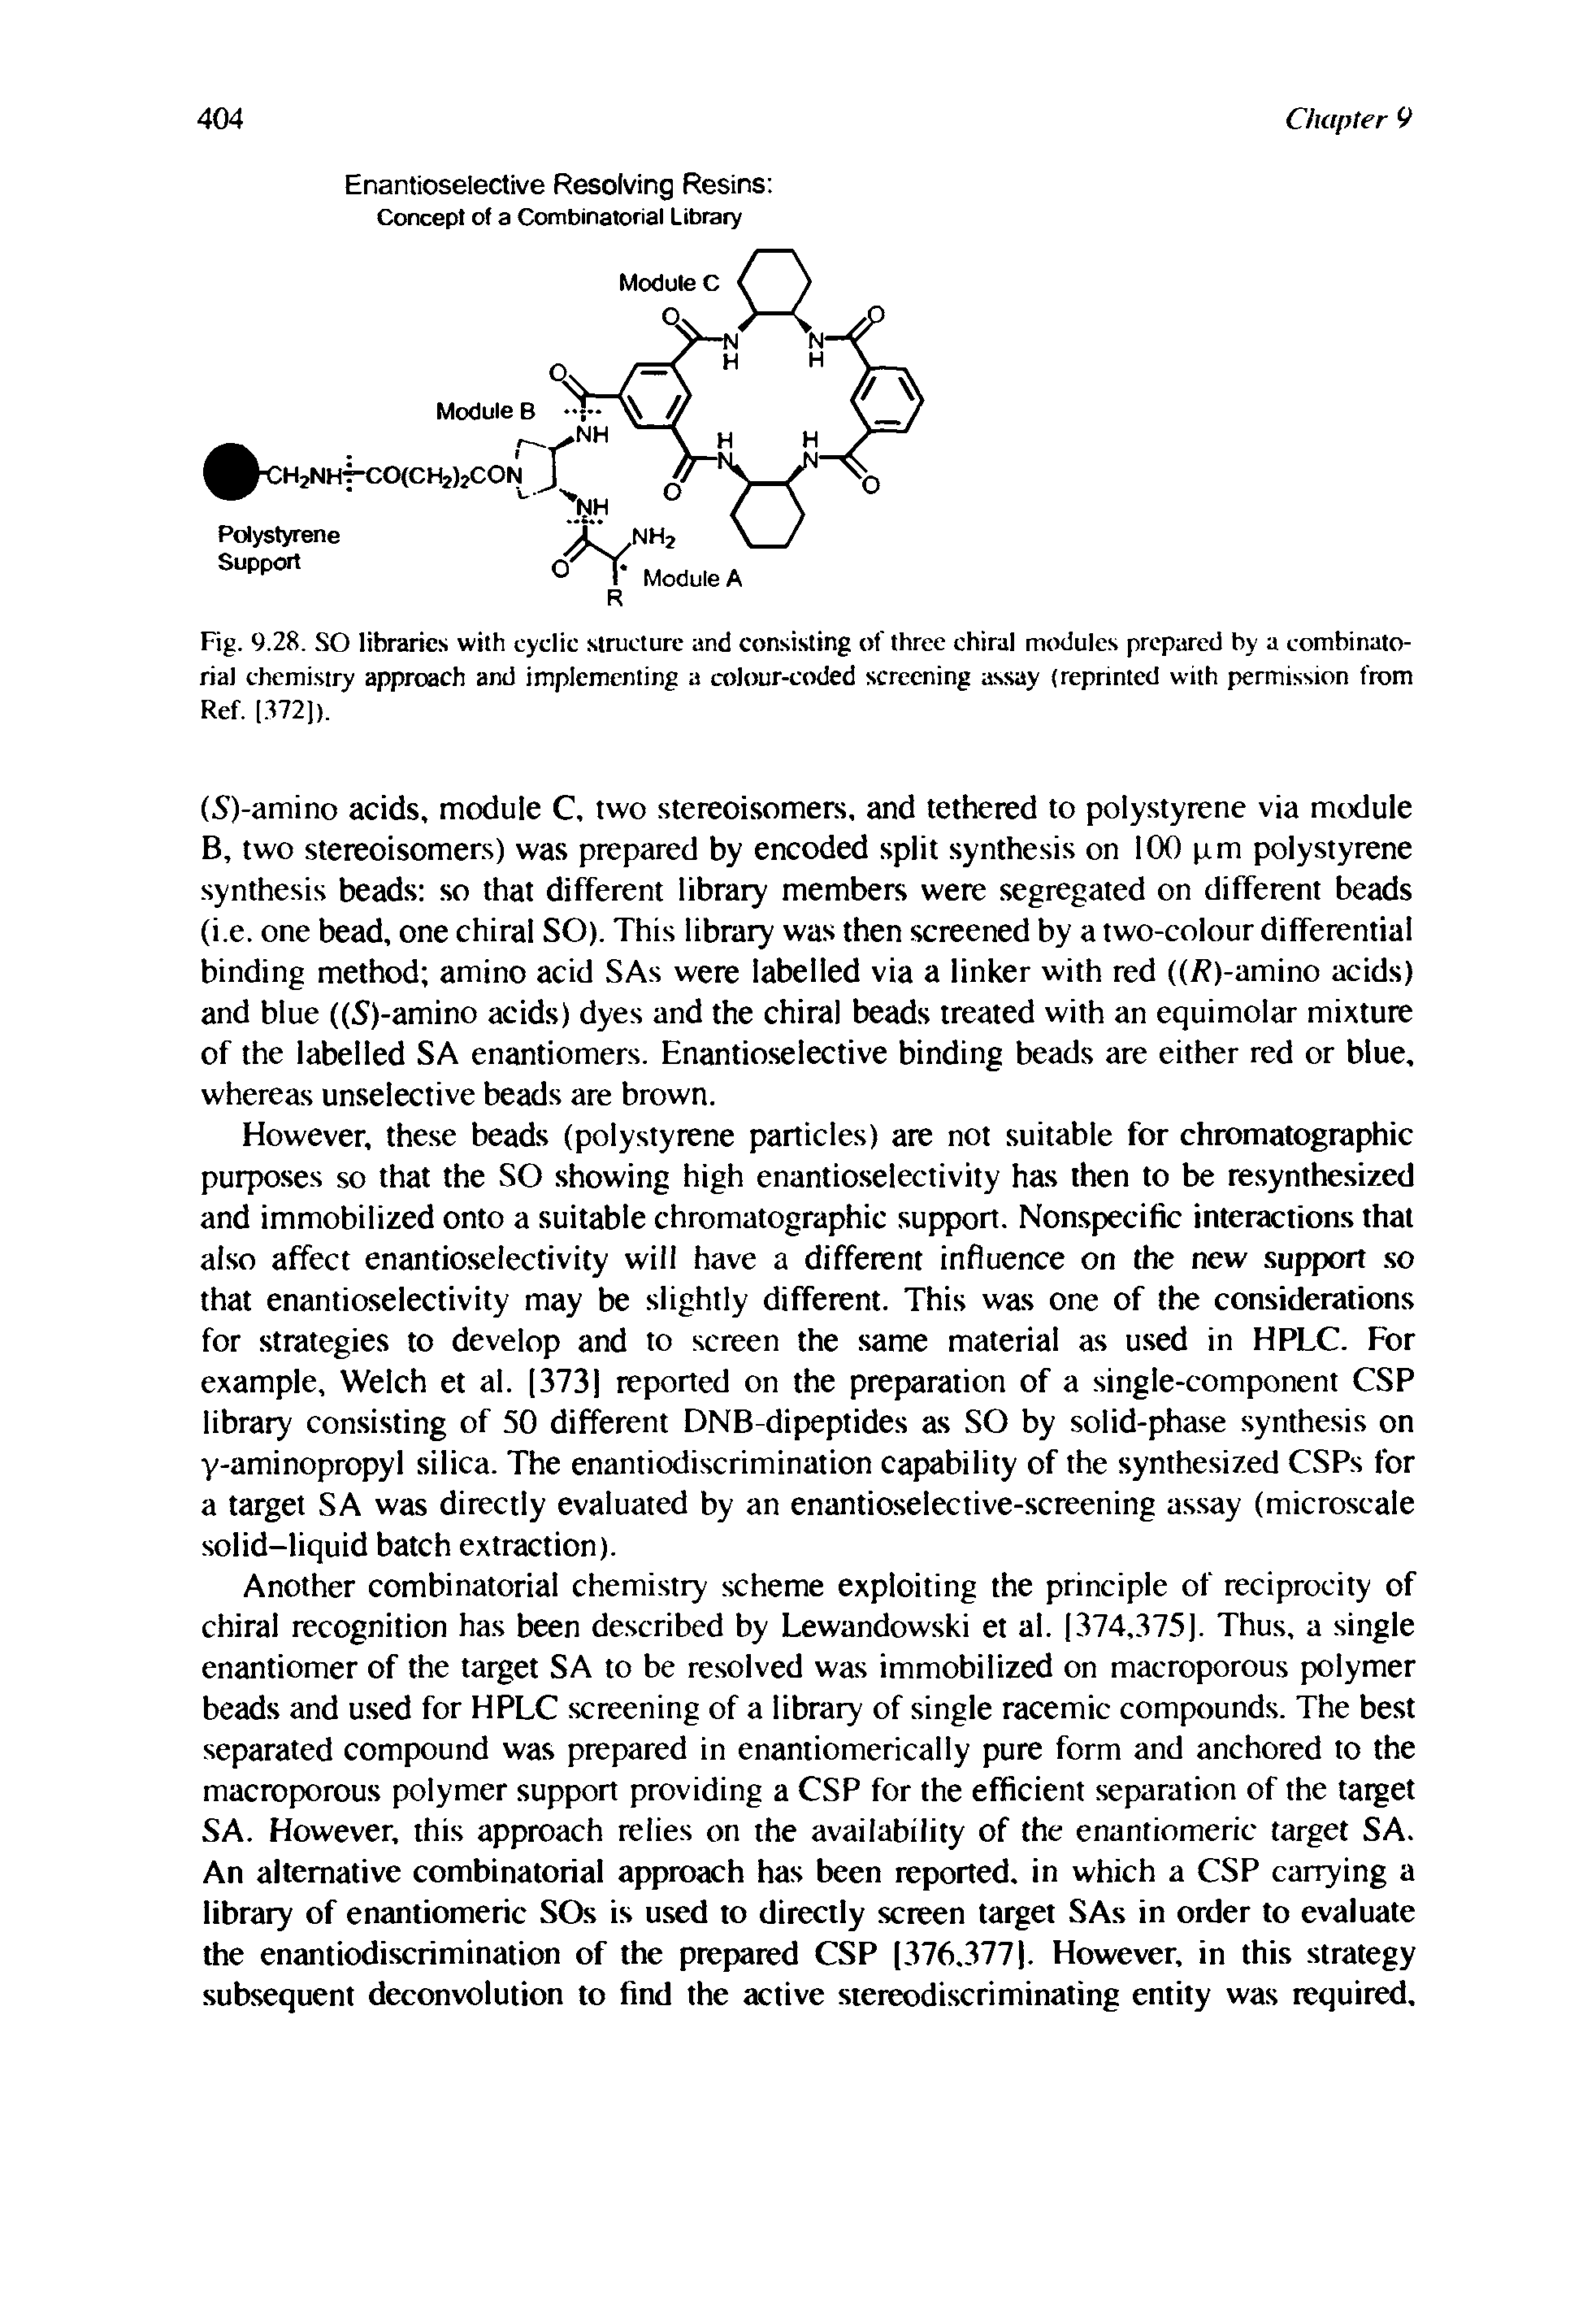 Fig. 9.28. SO libraries with cyclic structure and consisting of three chiral modules prepared by a combinatorial chemistry approach and implementing a atlour-coded screening assay (reprinted with permission from Ref. 1.172]).